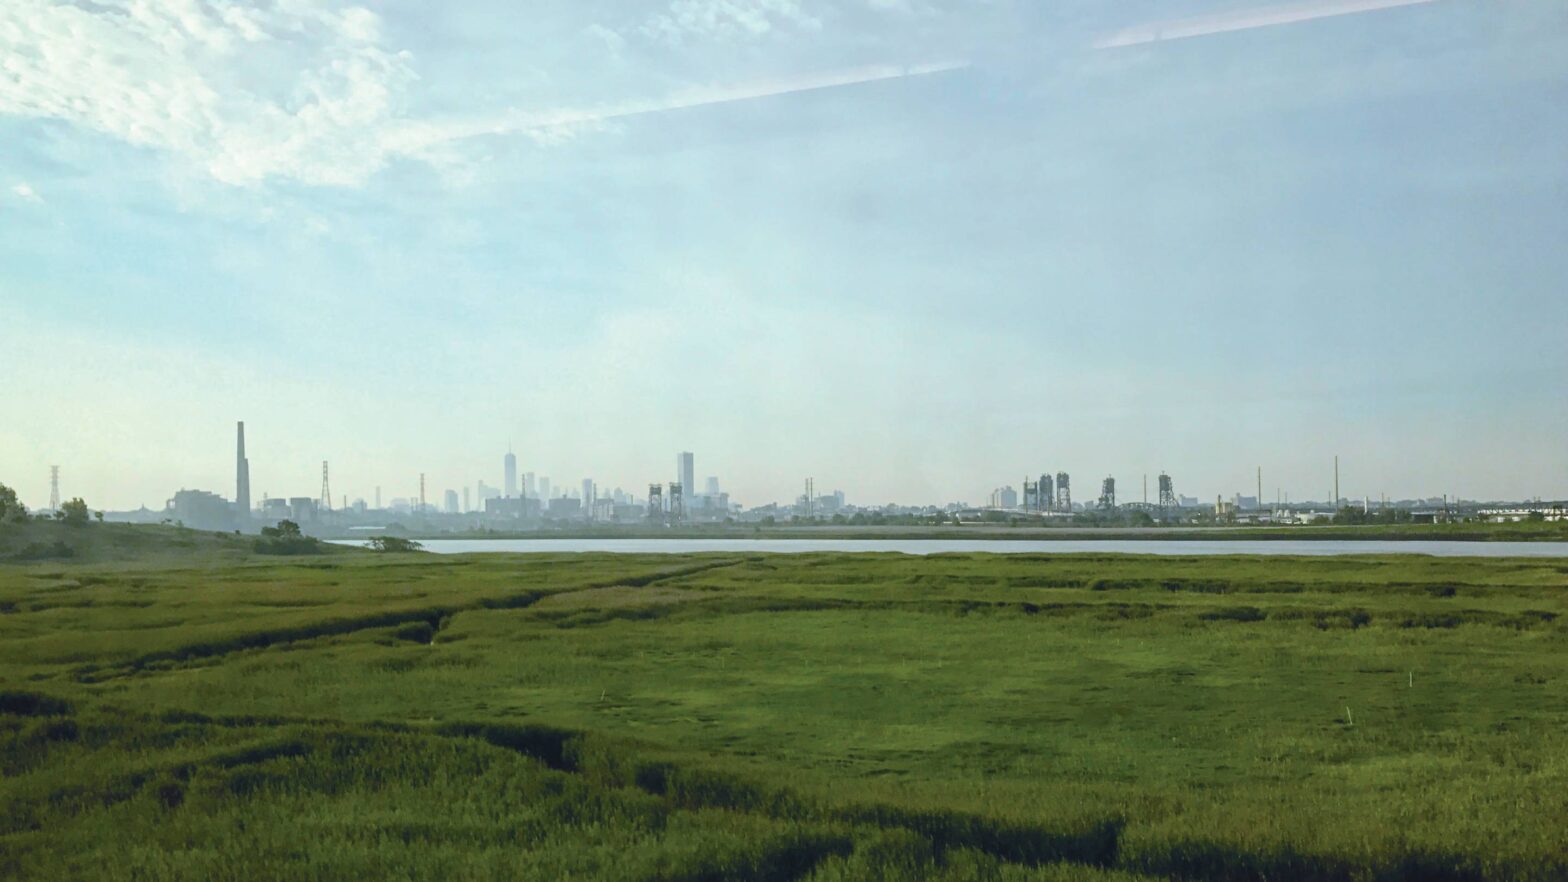 Photo of a city from afar, with grass in foreground. This is the Meadowlands.